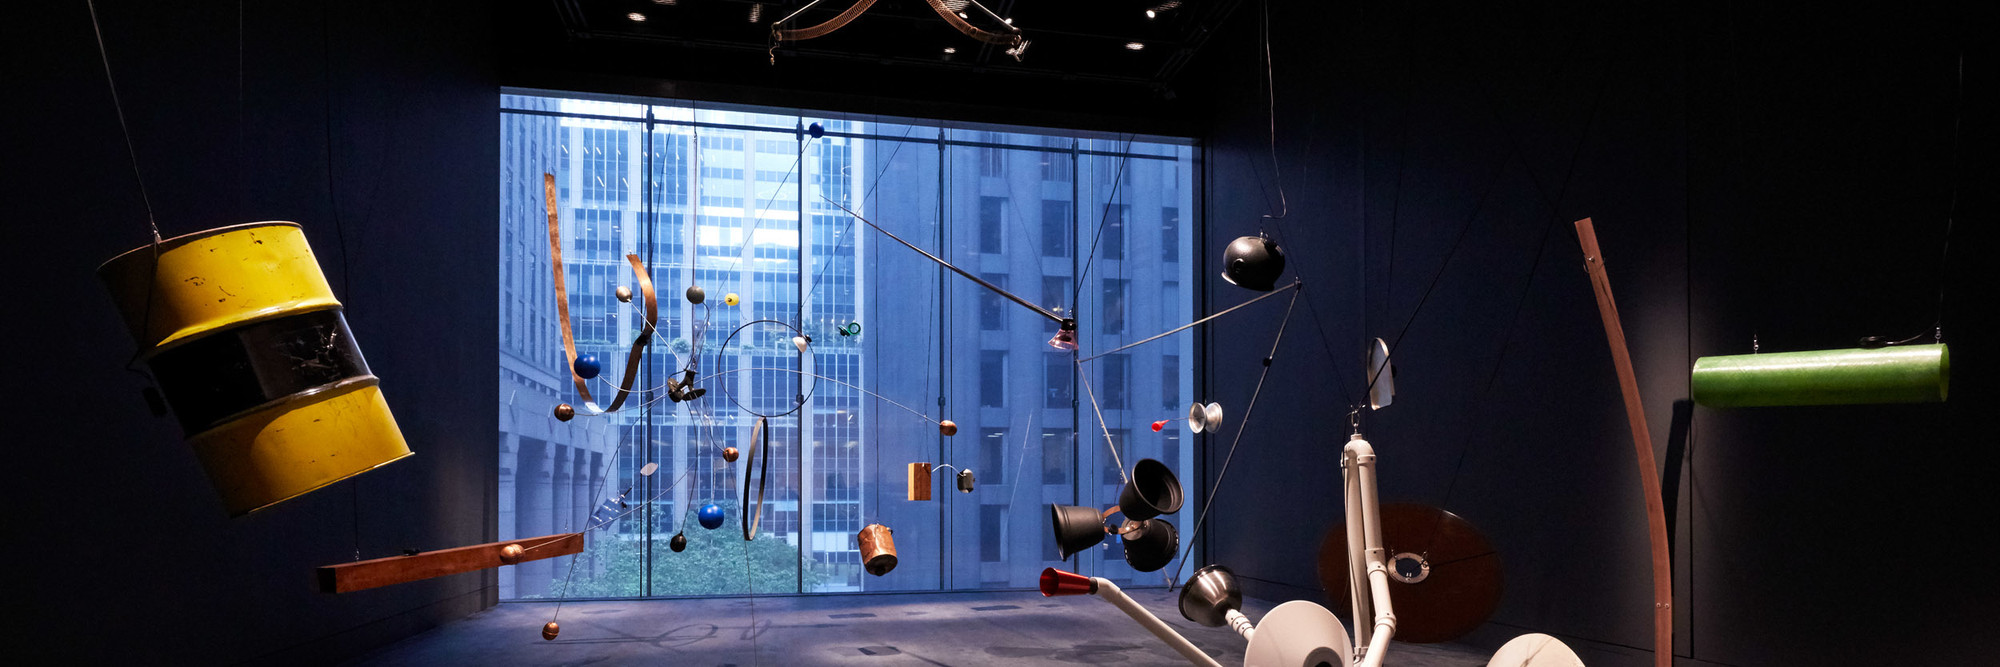 Rainforest V (variation 1). 1973/2015. Twenty objects, sound. Dimensions variable. Conceived by David Tudor, realized by Composers Inside Electronics, Inc. (John Driscoll, Phil Edelstein, and Matt Rogalsky). The Museum of Modern Art, New York. Committee on Media and Performance Art Funds. © 2019 David Tudor and Composers Inside Electronics Inc. Installation view, October 21, 2019–January 5, 2020, The Museum of Modern Art, New York. Image © 2019 The Museum of Modern Art. Photo: Heidi Bohnenkamp